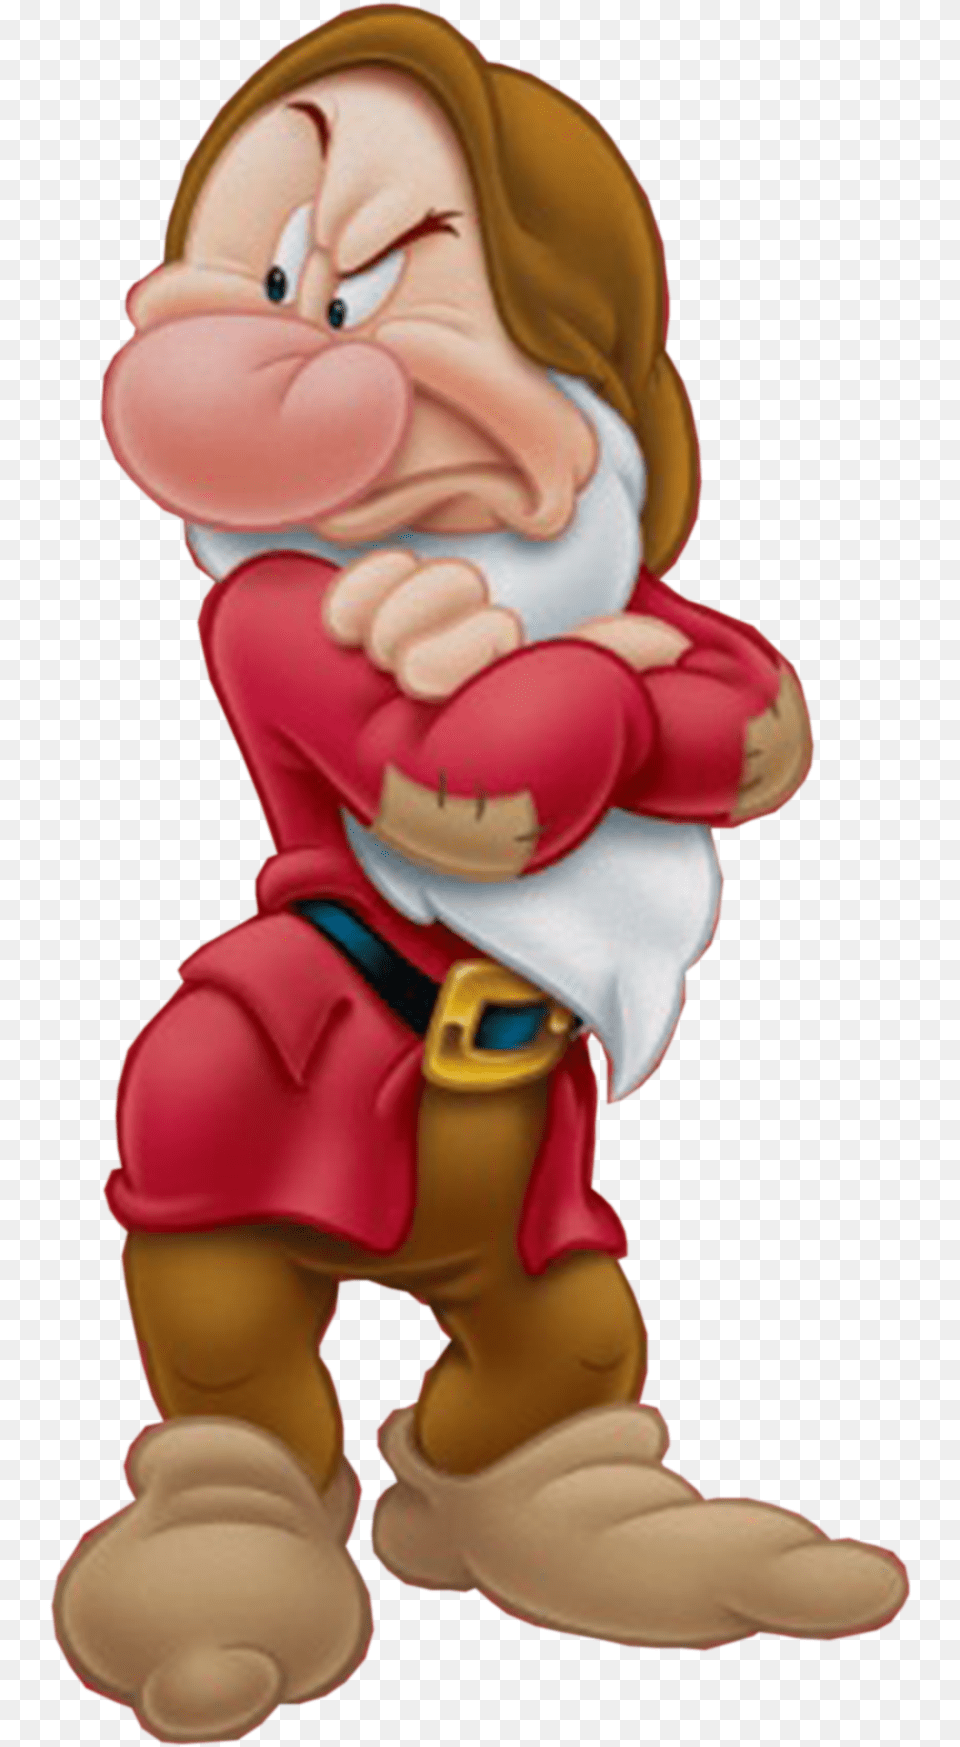 Grumpy Dwarf Snow White, Baby, Person, Cartoon, Face Png Image